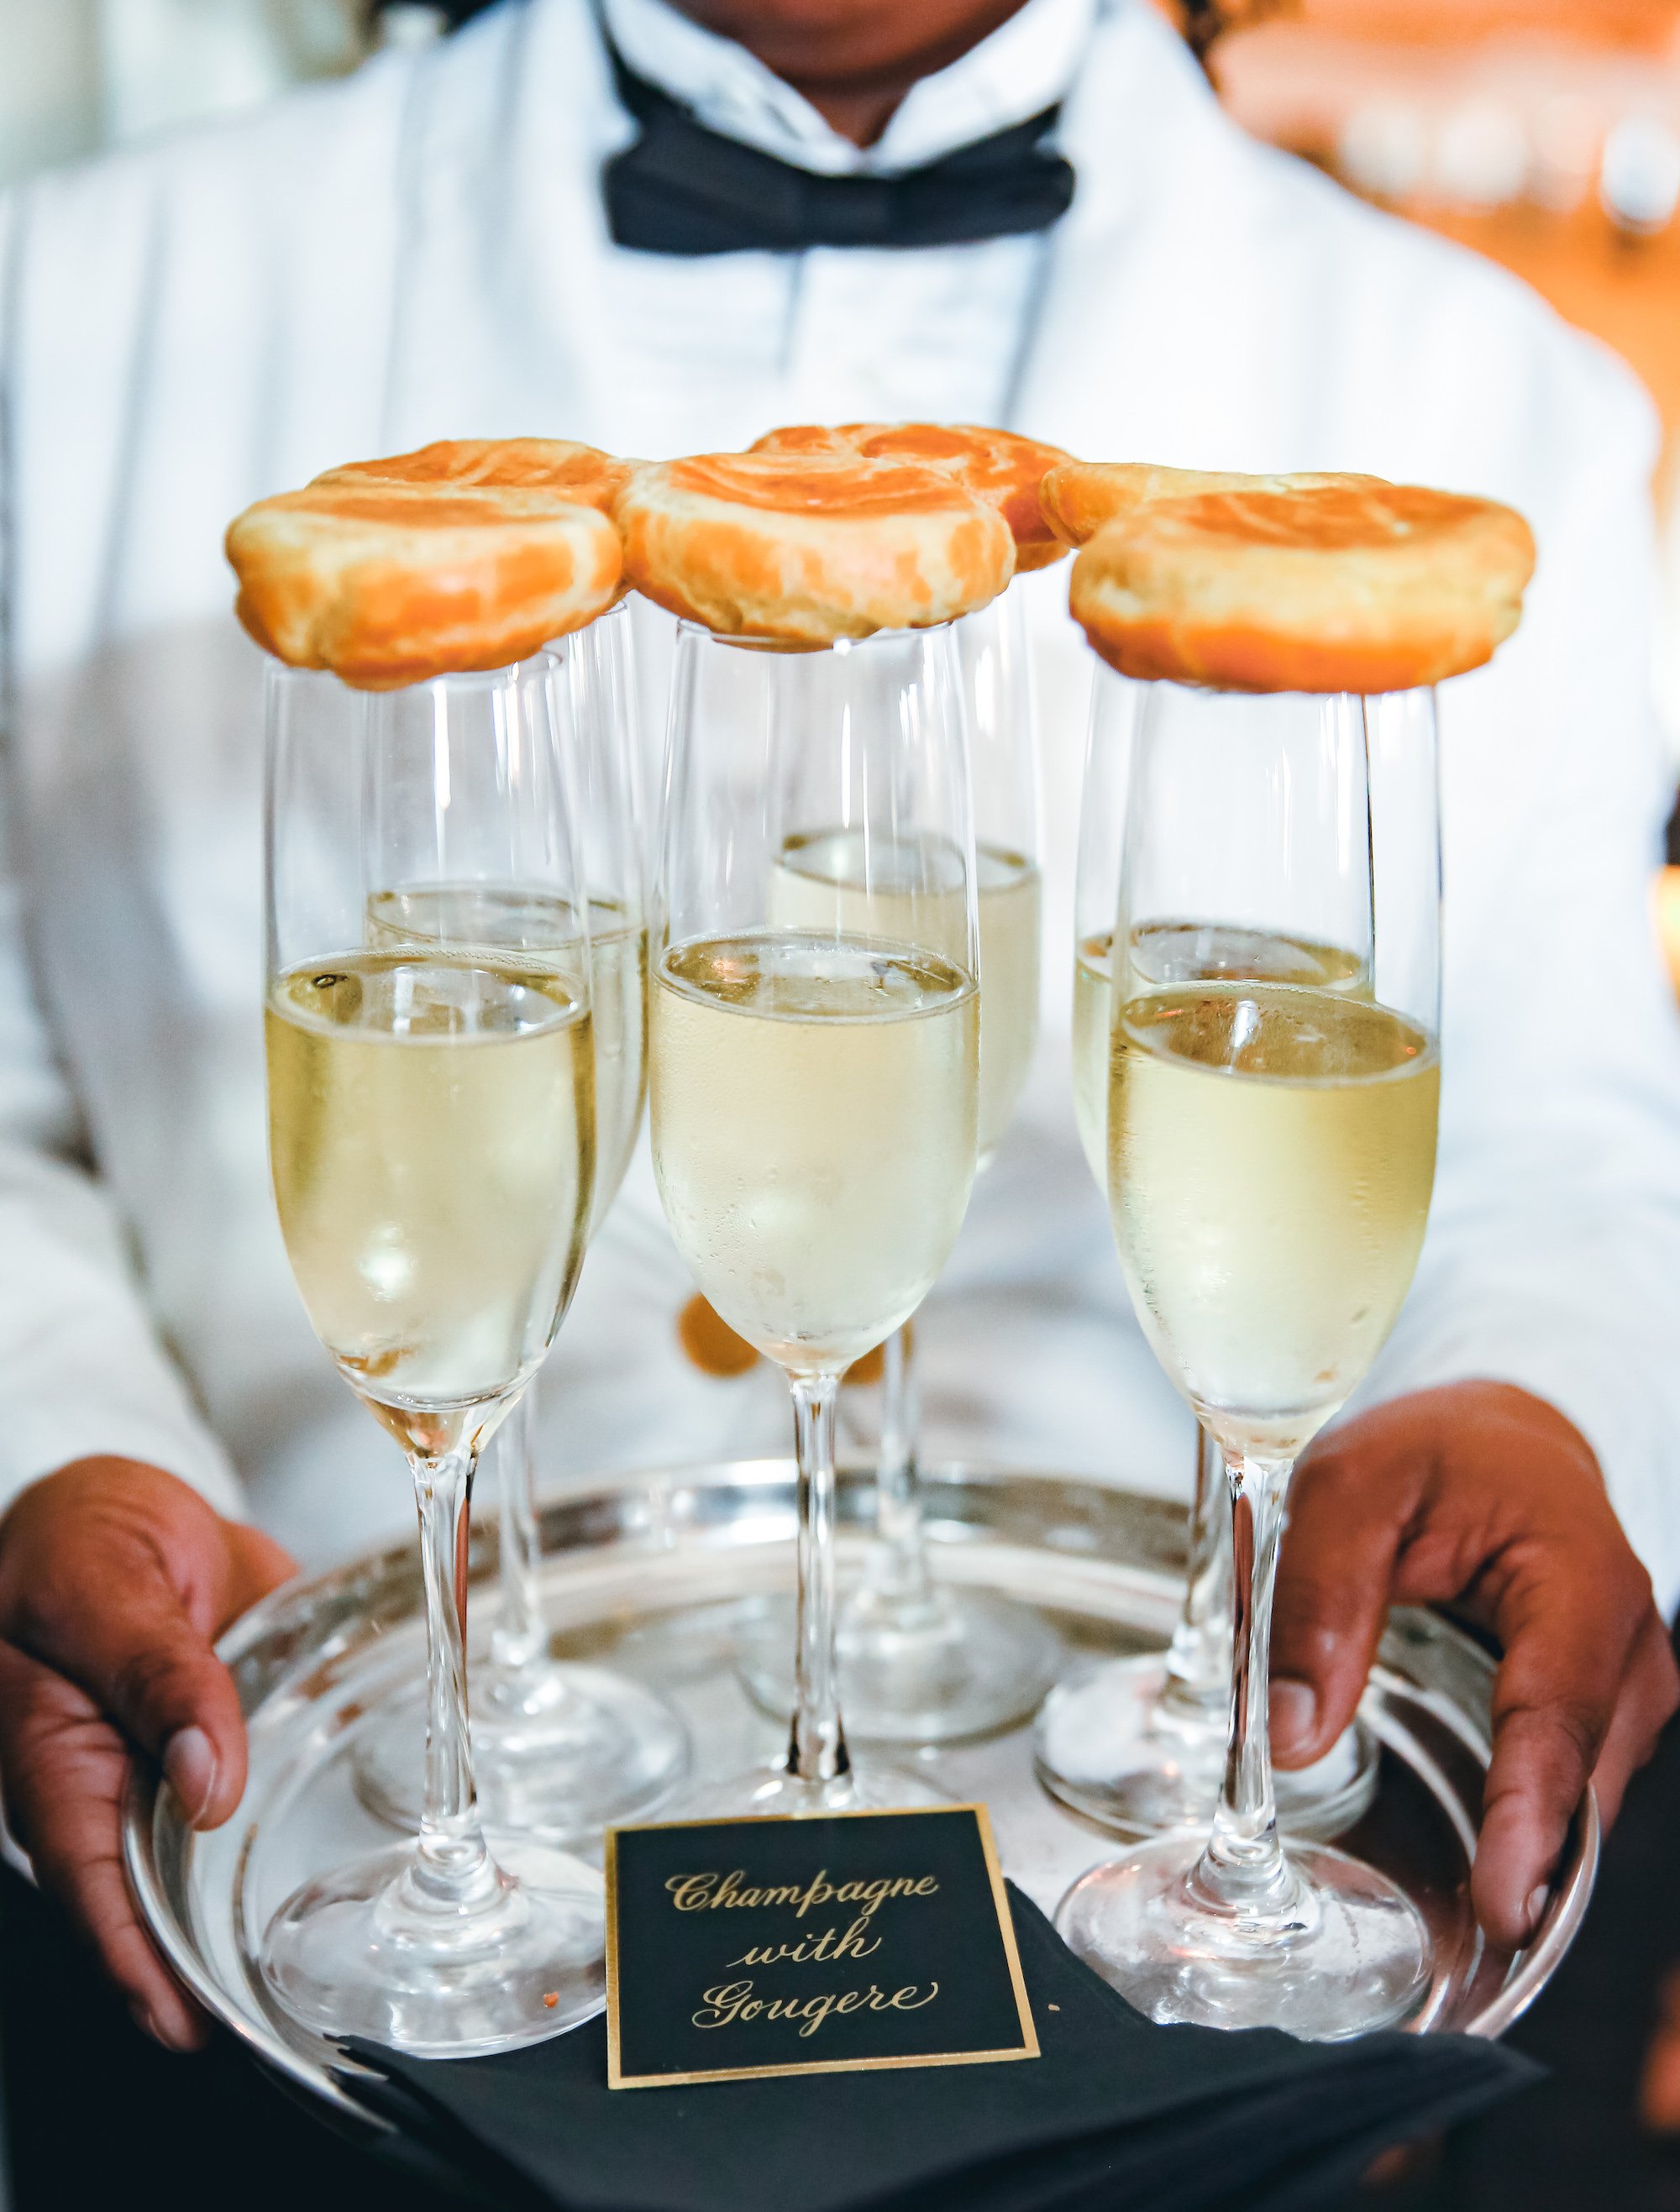  A waiter holds a silver tray with glasses of champagne topped with gougère for the wedding toasts.